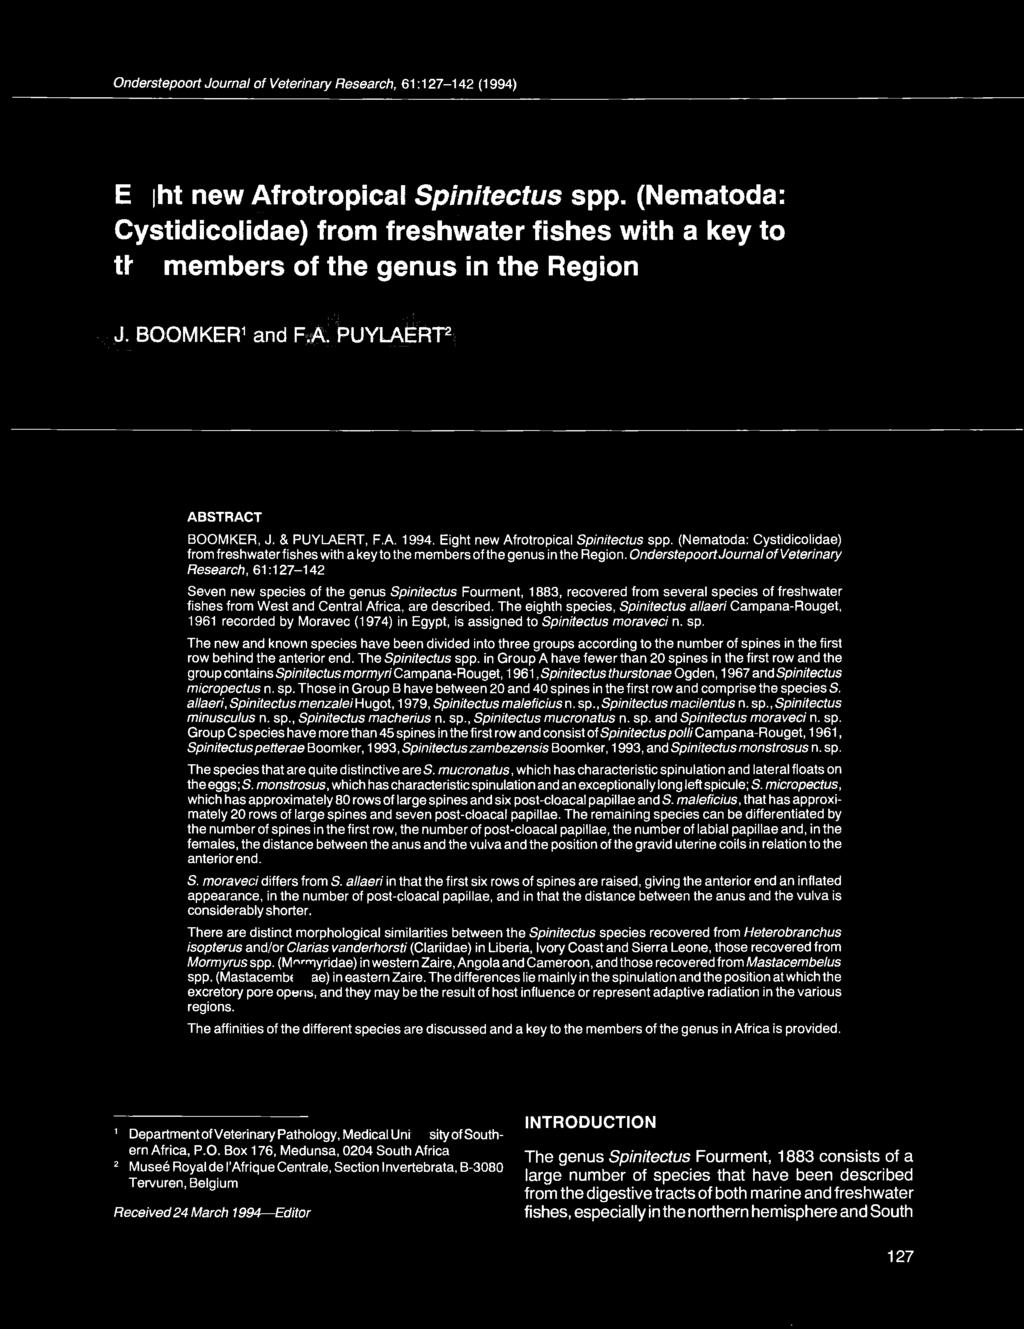 Eight new Afrotropical Spinitectus spp. (Nematoda: Cystidicolidae) from freshwater fishes with a key to the members of the genus in the Region.